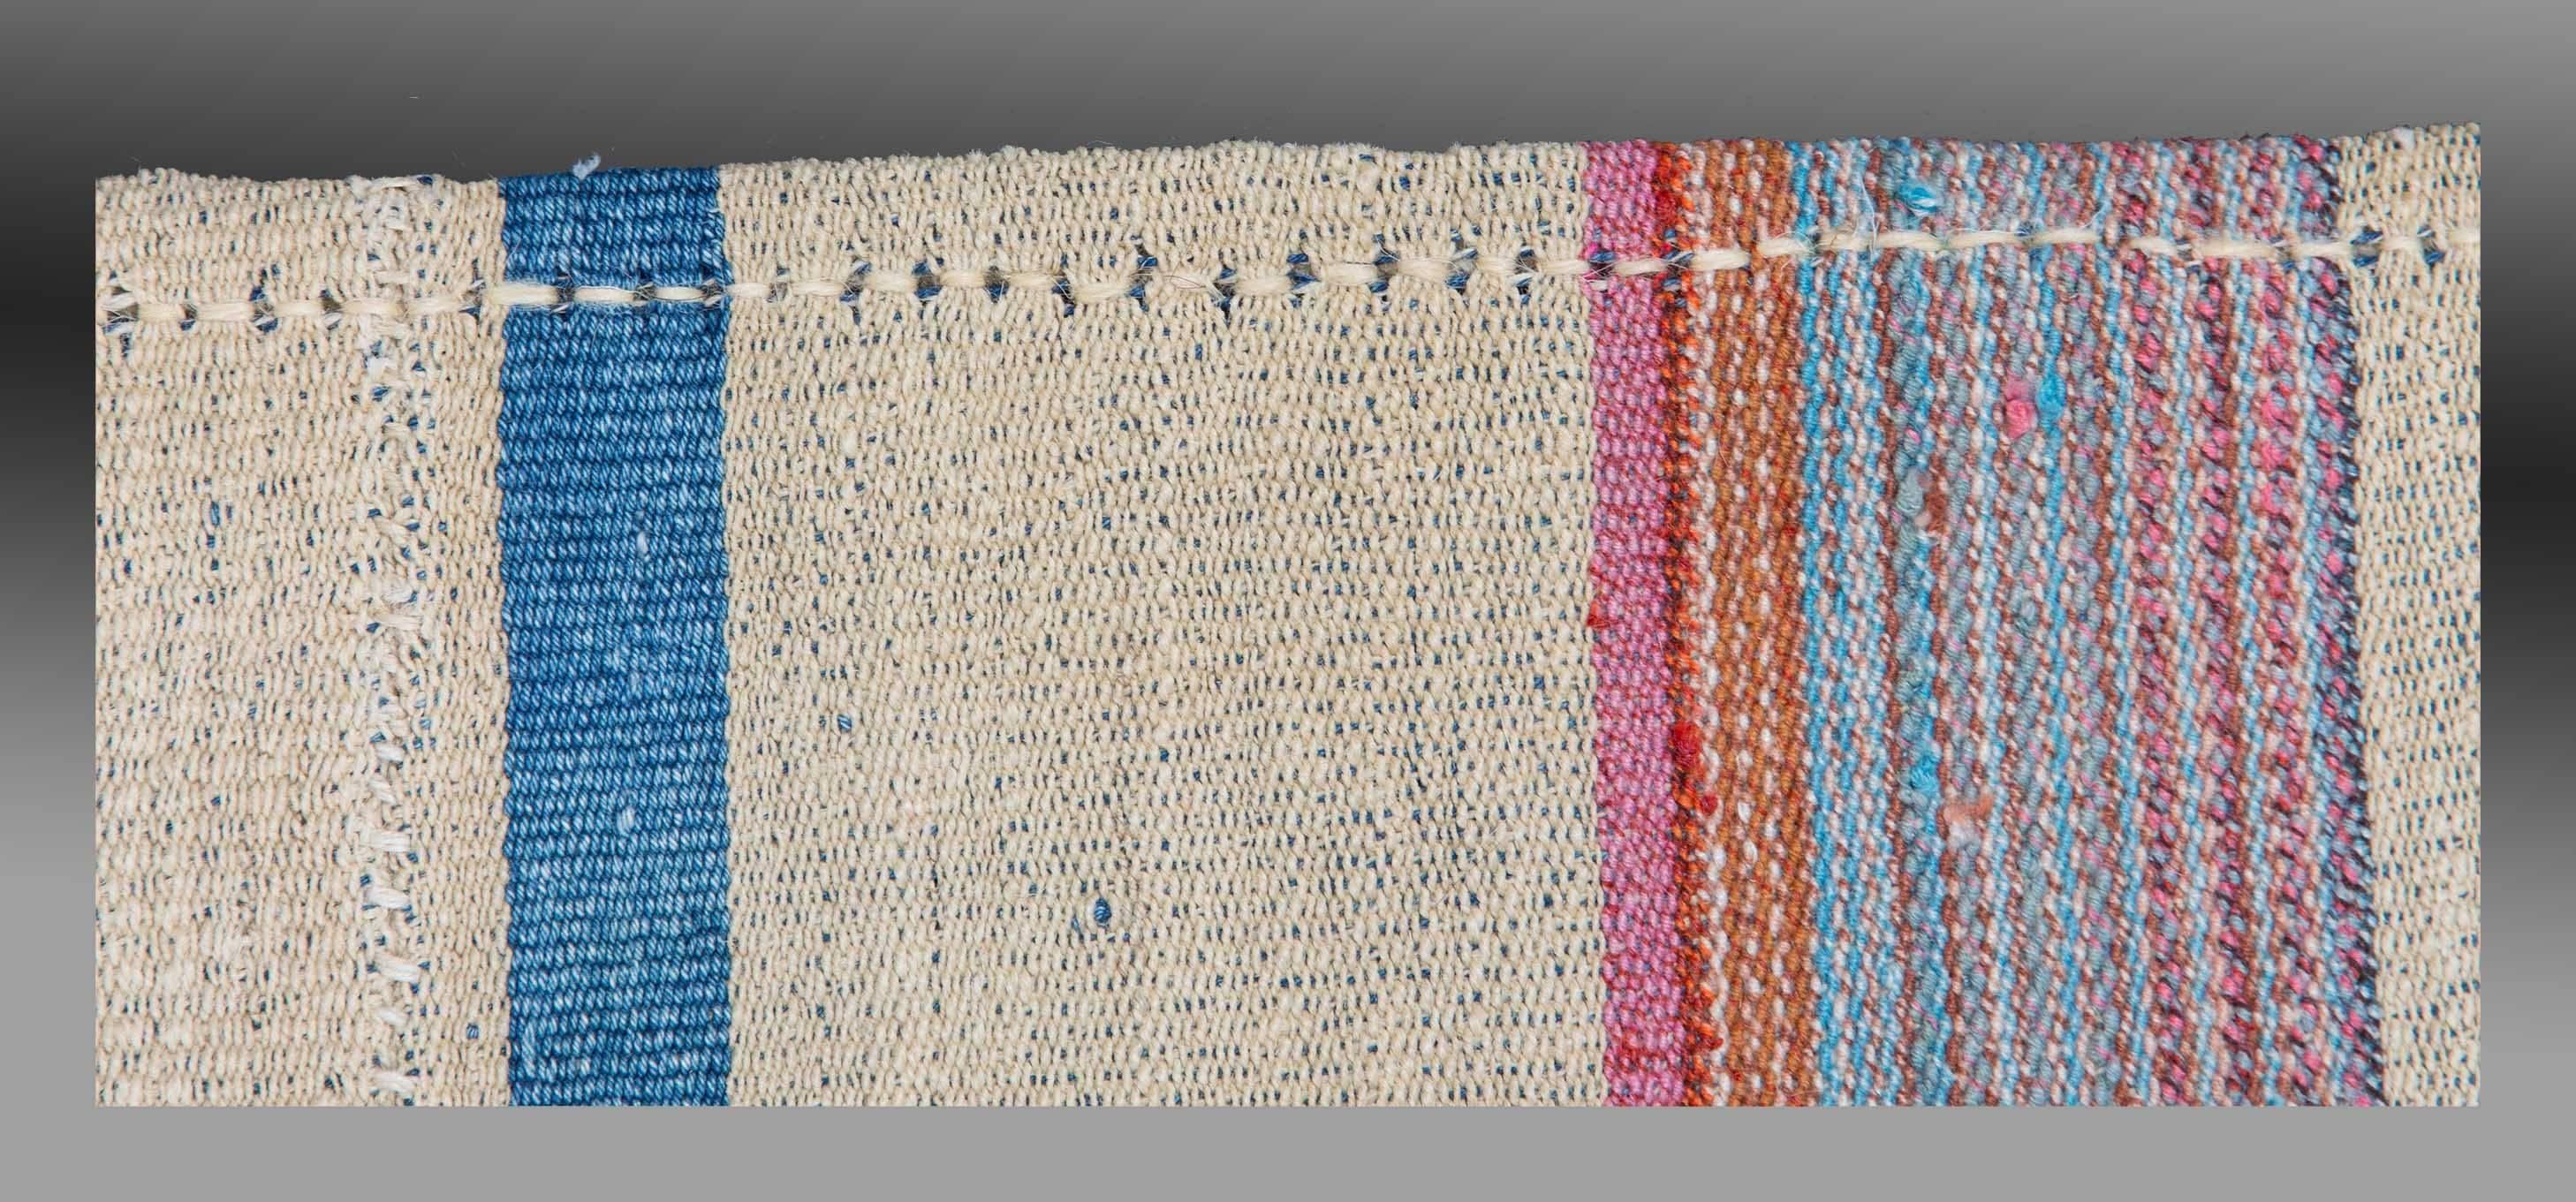 Cotton Kilim, Flat-Weave Jajim from Southern Turkey, Mid-20th Century For Sale